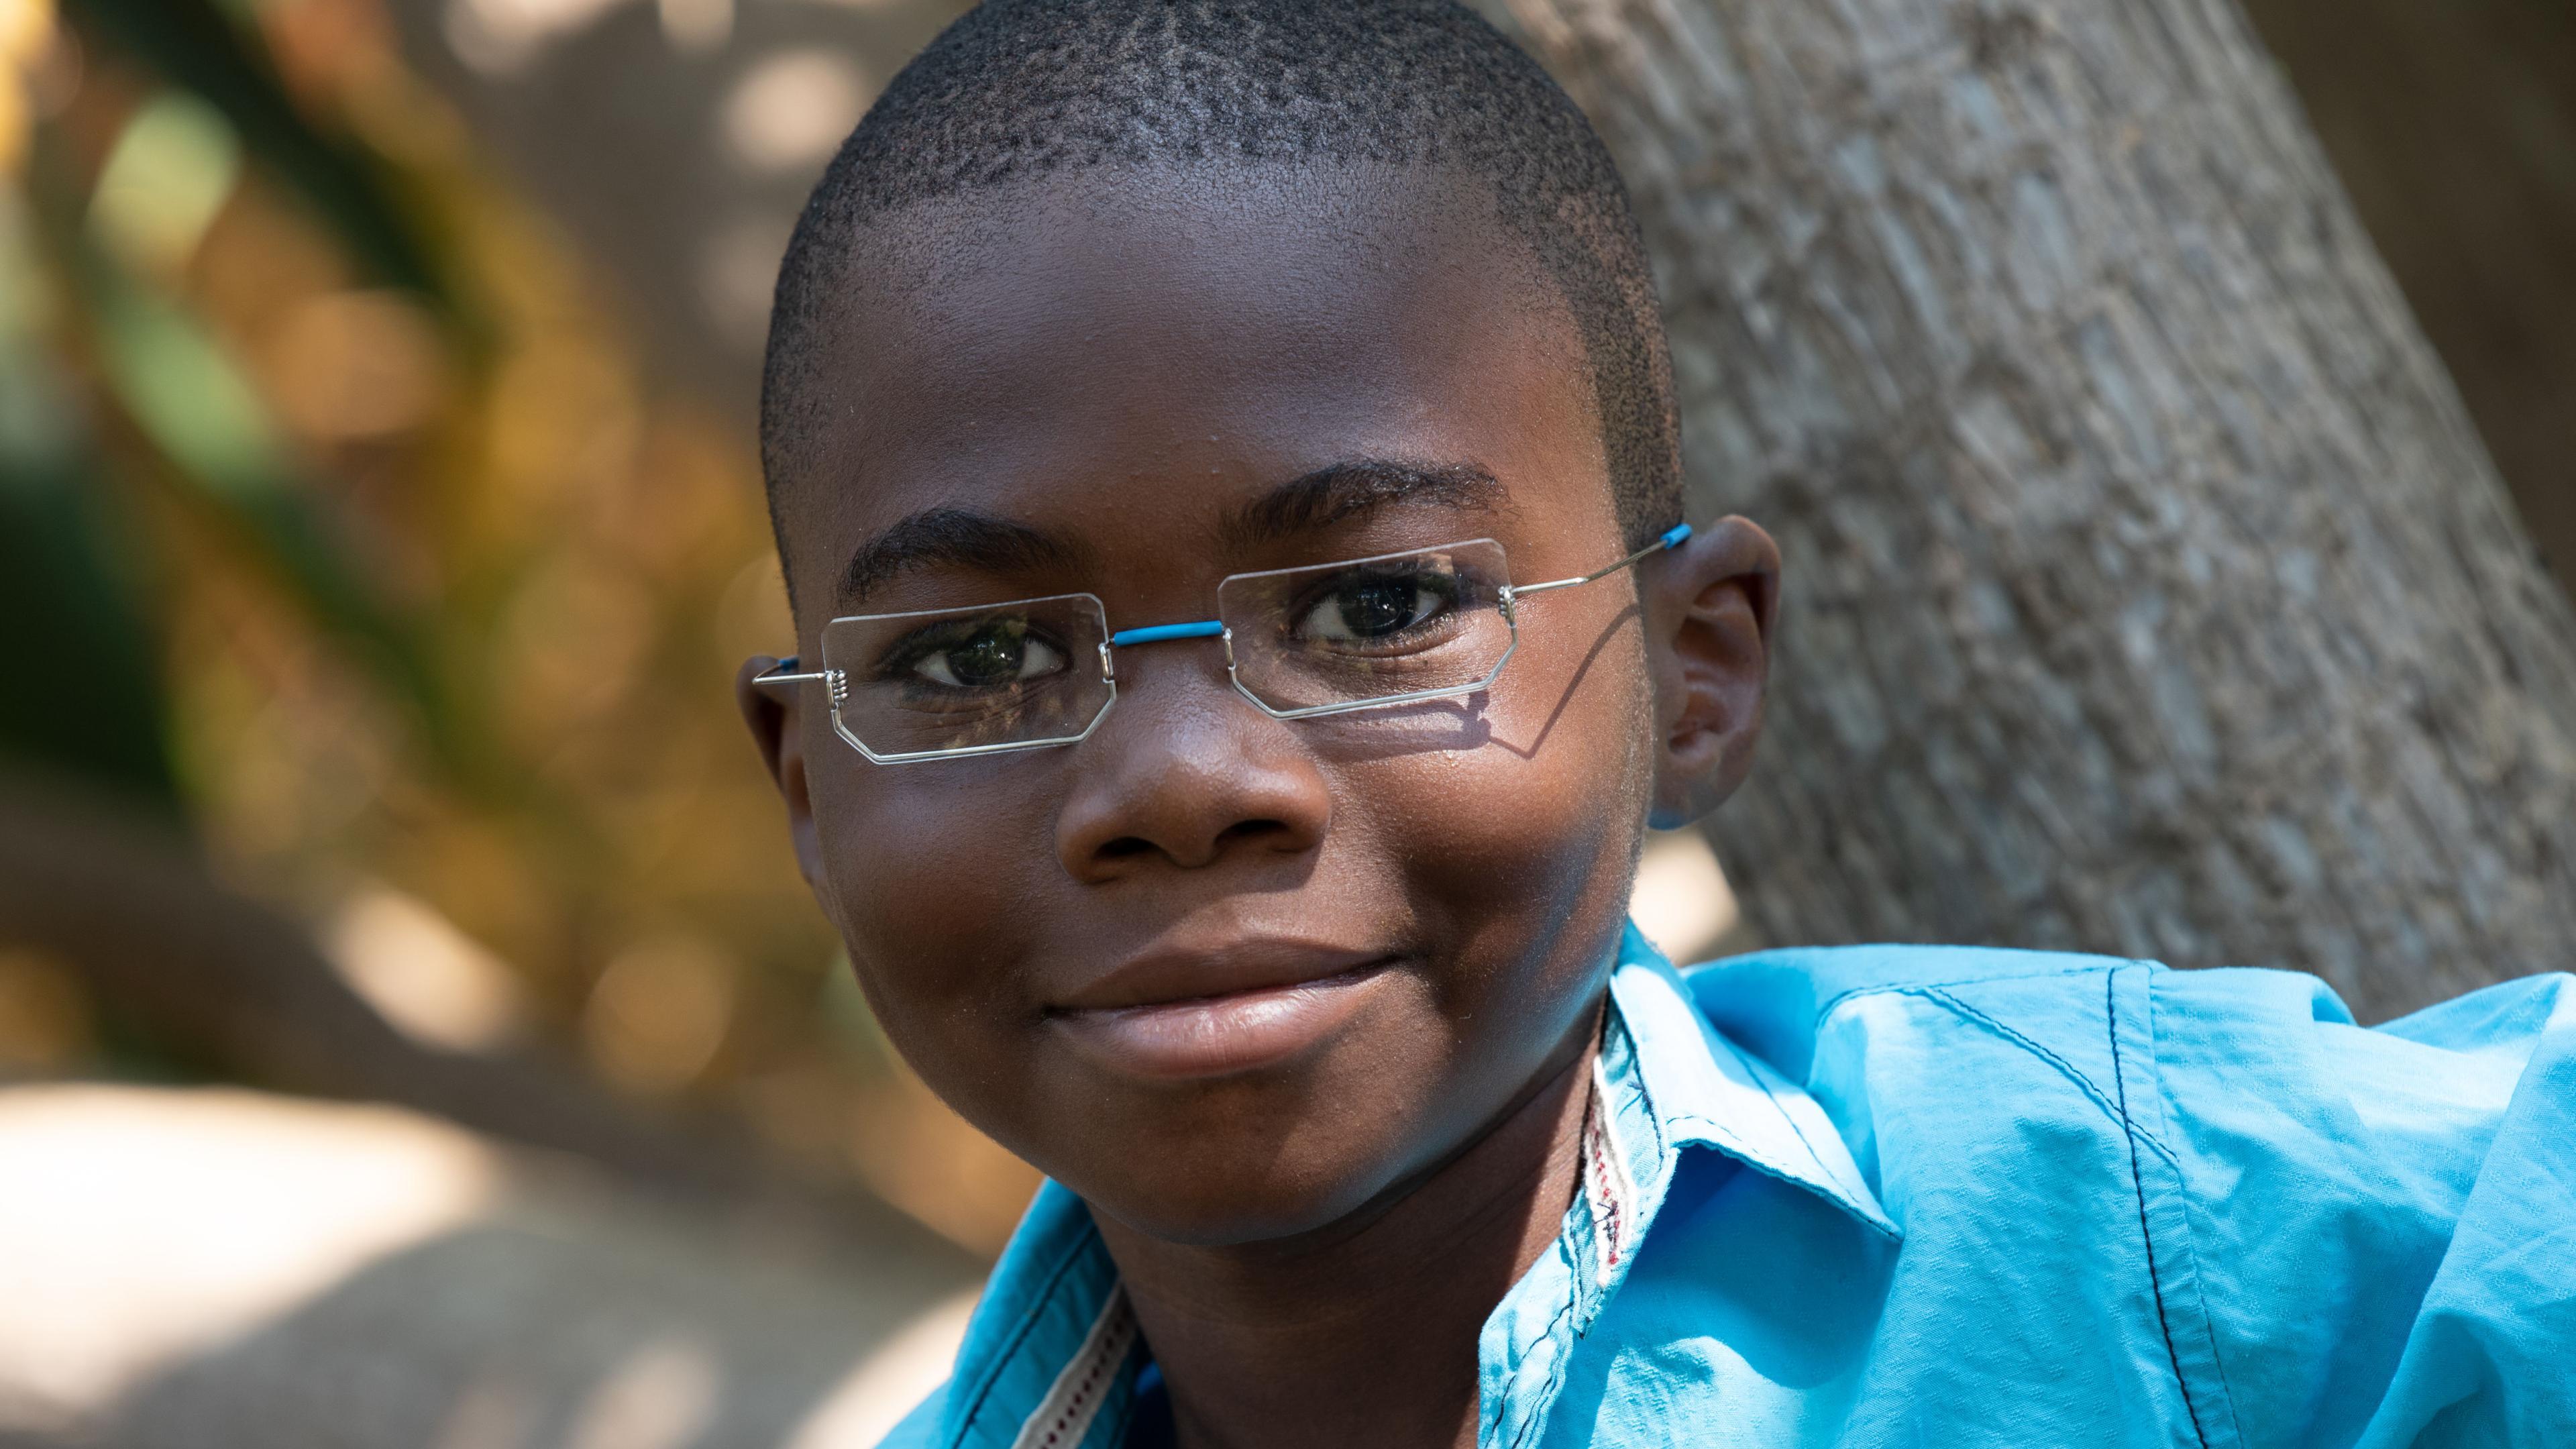 Malawian boy with OneDollarGlasses and square lenses